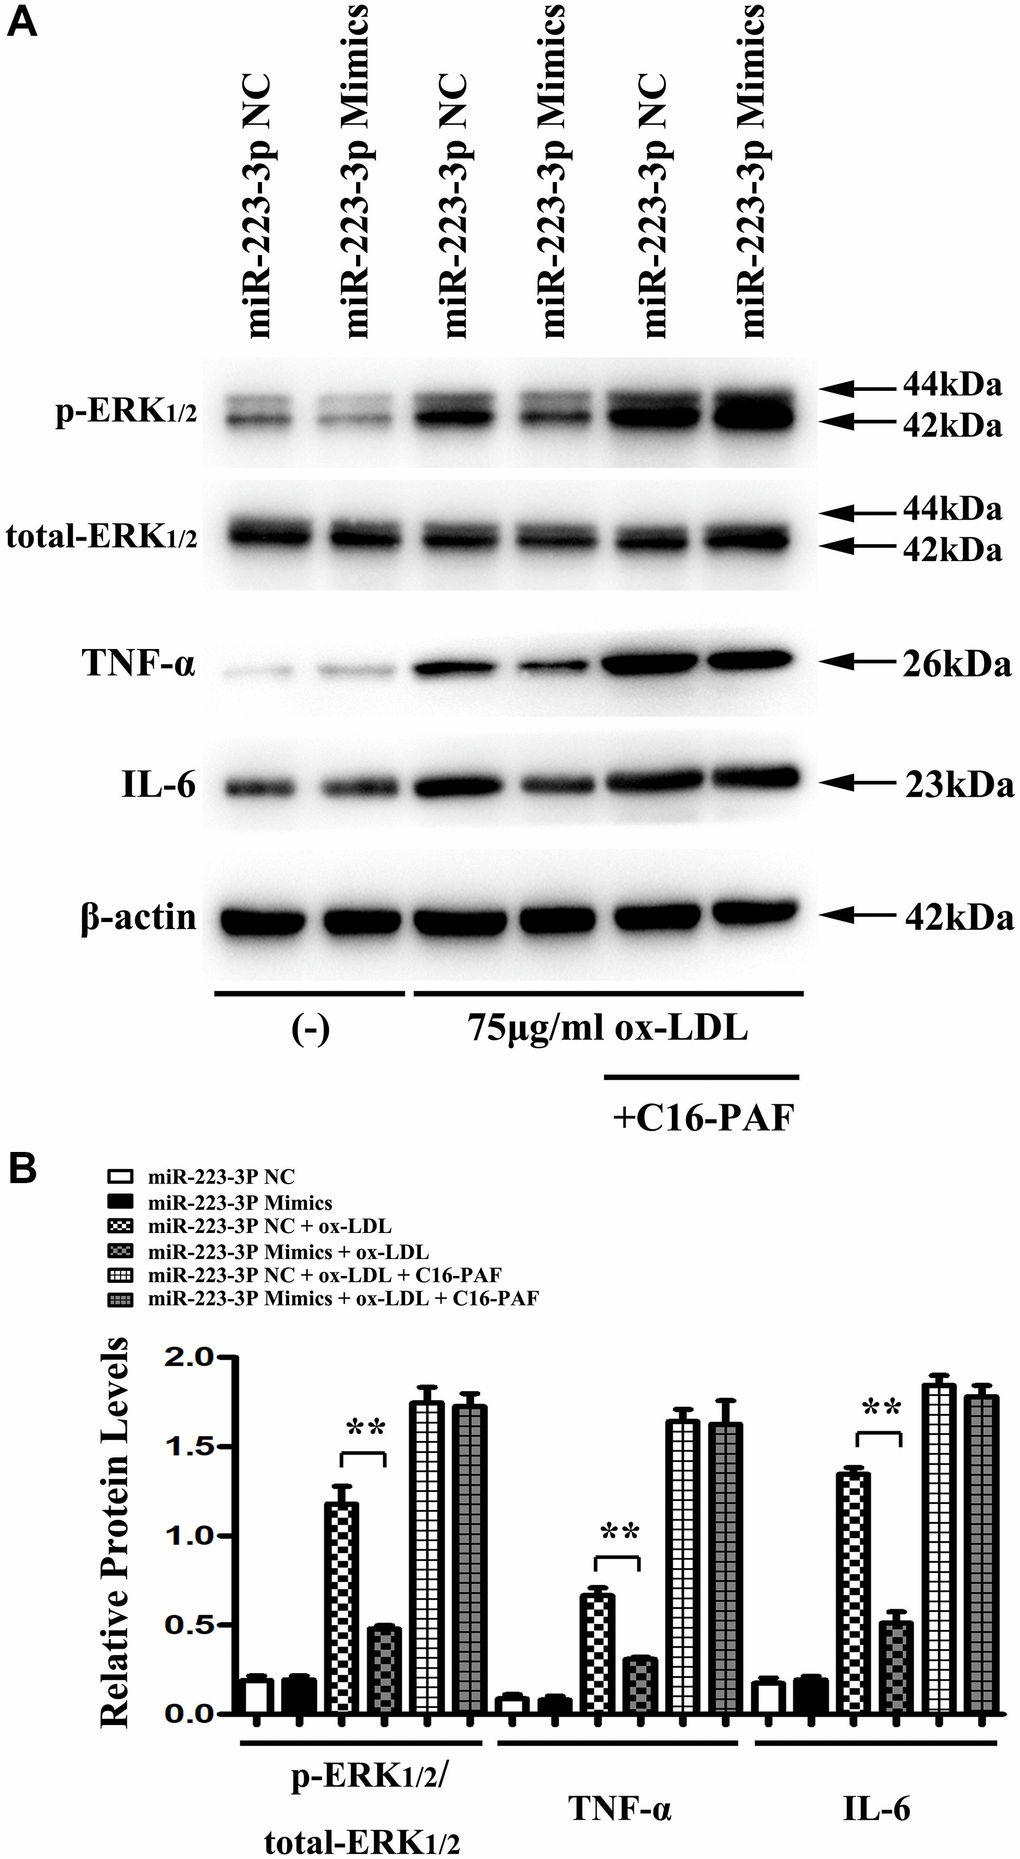 MiR-223-3p mimics inhibits the inflammatory response was via the ERK1/2 pathway in vitro. (A) The western blots analysis revealed that p-ERK1/2, IL6, and TNF-a were significantly suppressed in miR-223-3p mimic-transfected macrophages with ox-LDL stimulation, and the decreased expression levels of p-ERK1/2, IL6, and TNF-a were markedly enhanced in miR-223-3p mimic-transfected macrophages with ox-LDL by C16-PAF. (B) The quantitative analysis revealed that the relative protein levels of p-ERK1/2, IL6, and TNF-a were decreased in miR-223-3p mimic-transfected macrophages with ox-LDL stimulation, and the decreased relative protein levels of p-ERK1/2, IL6, and TNF-a were markedly enhanced in miR-223-3p mimic-transfected macrophages with ox-LDL by C16-PAF. (*P